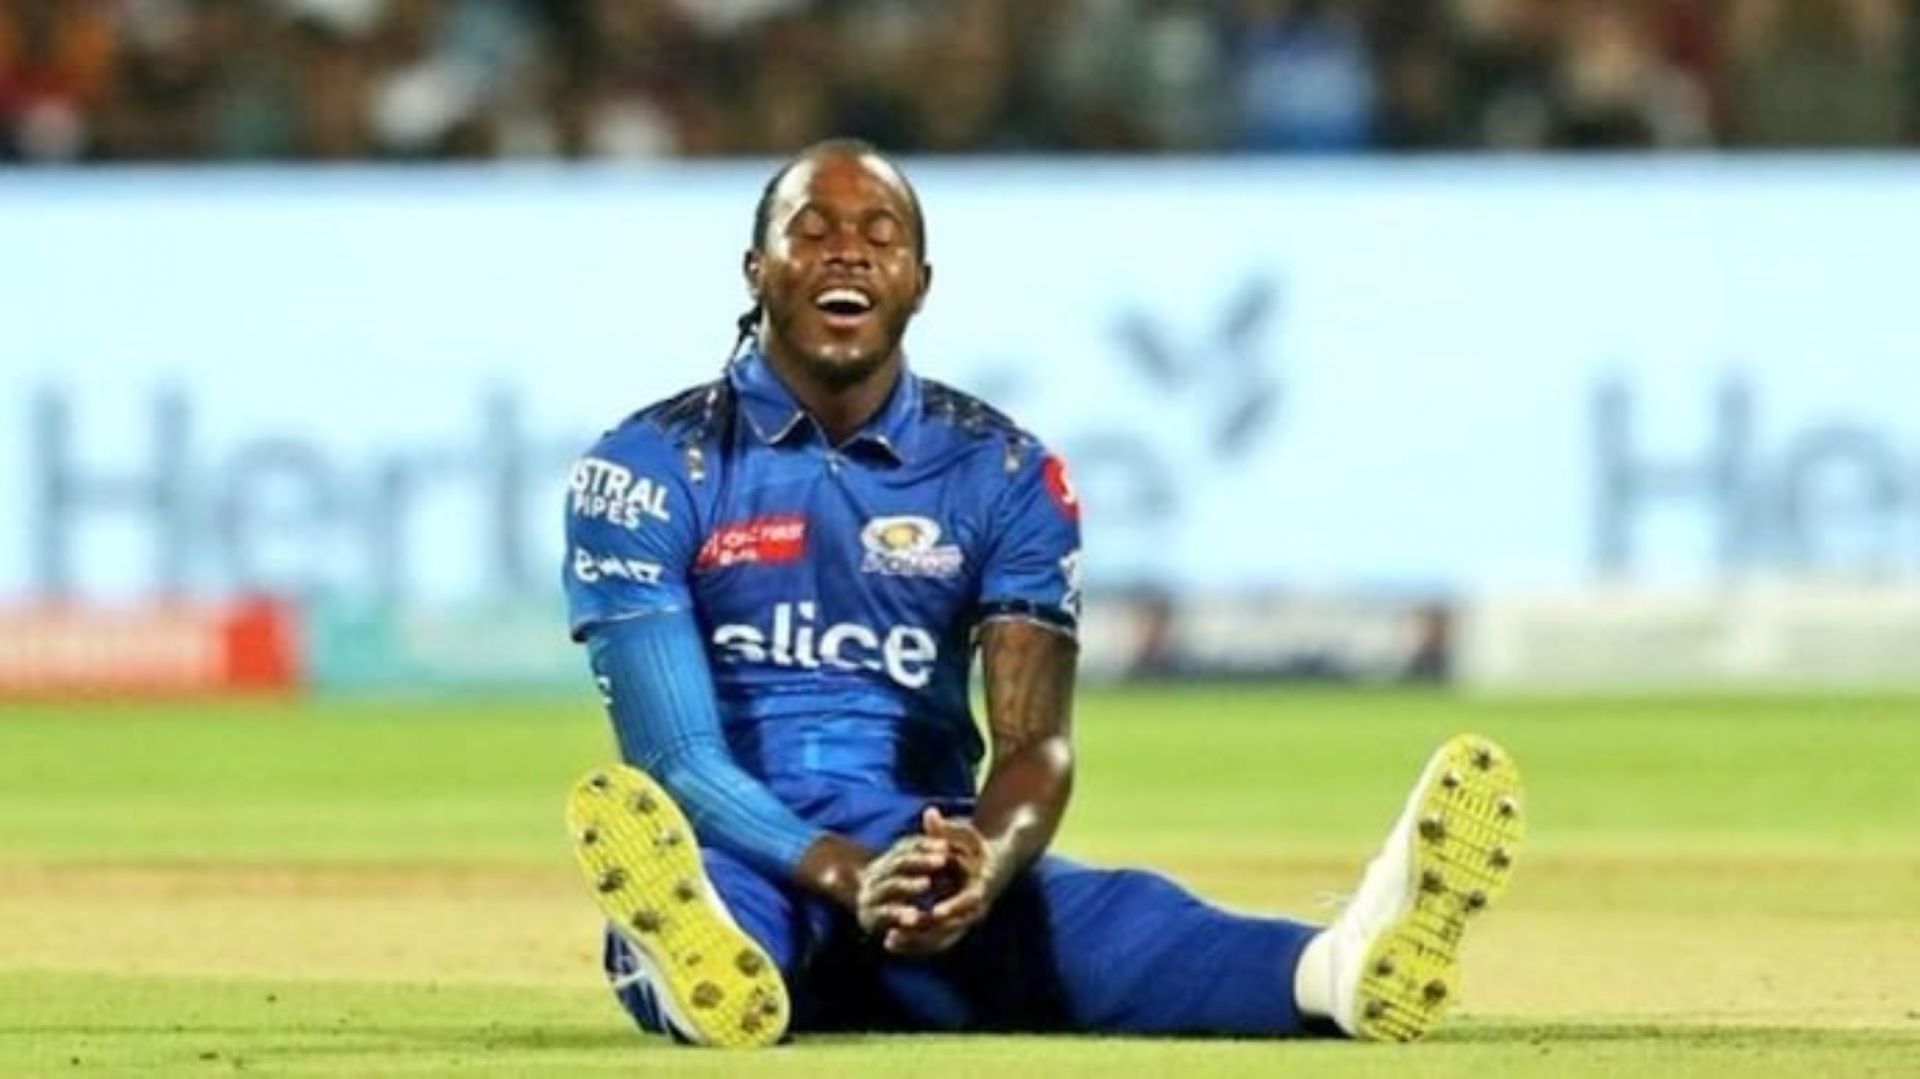 Jofra Archer misses out on the game against GT